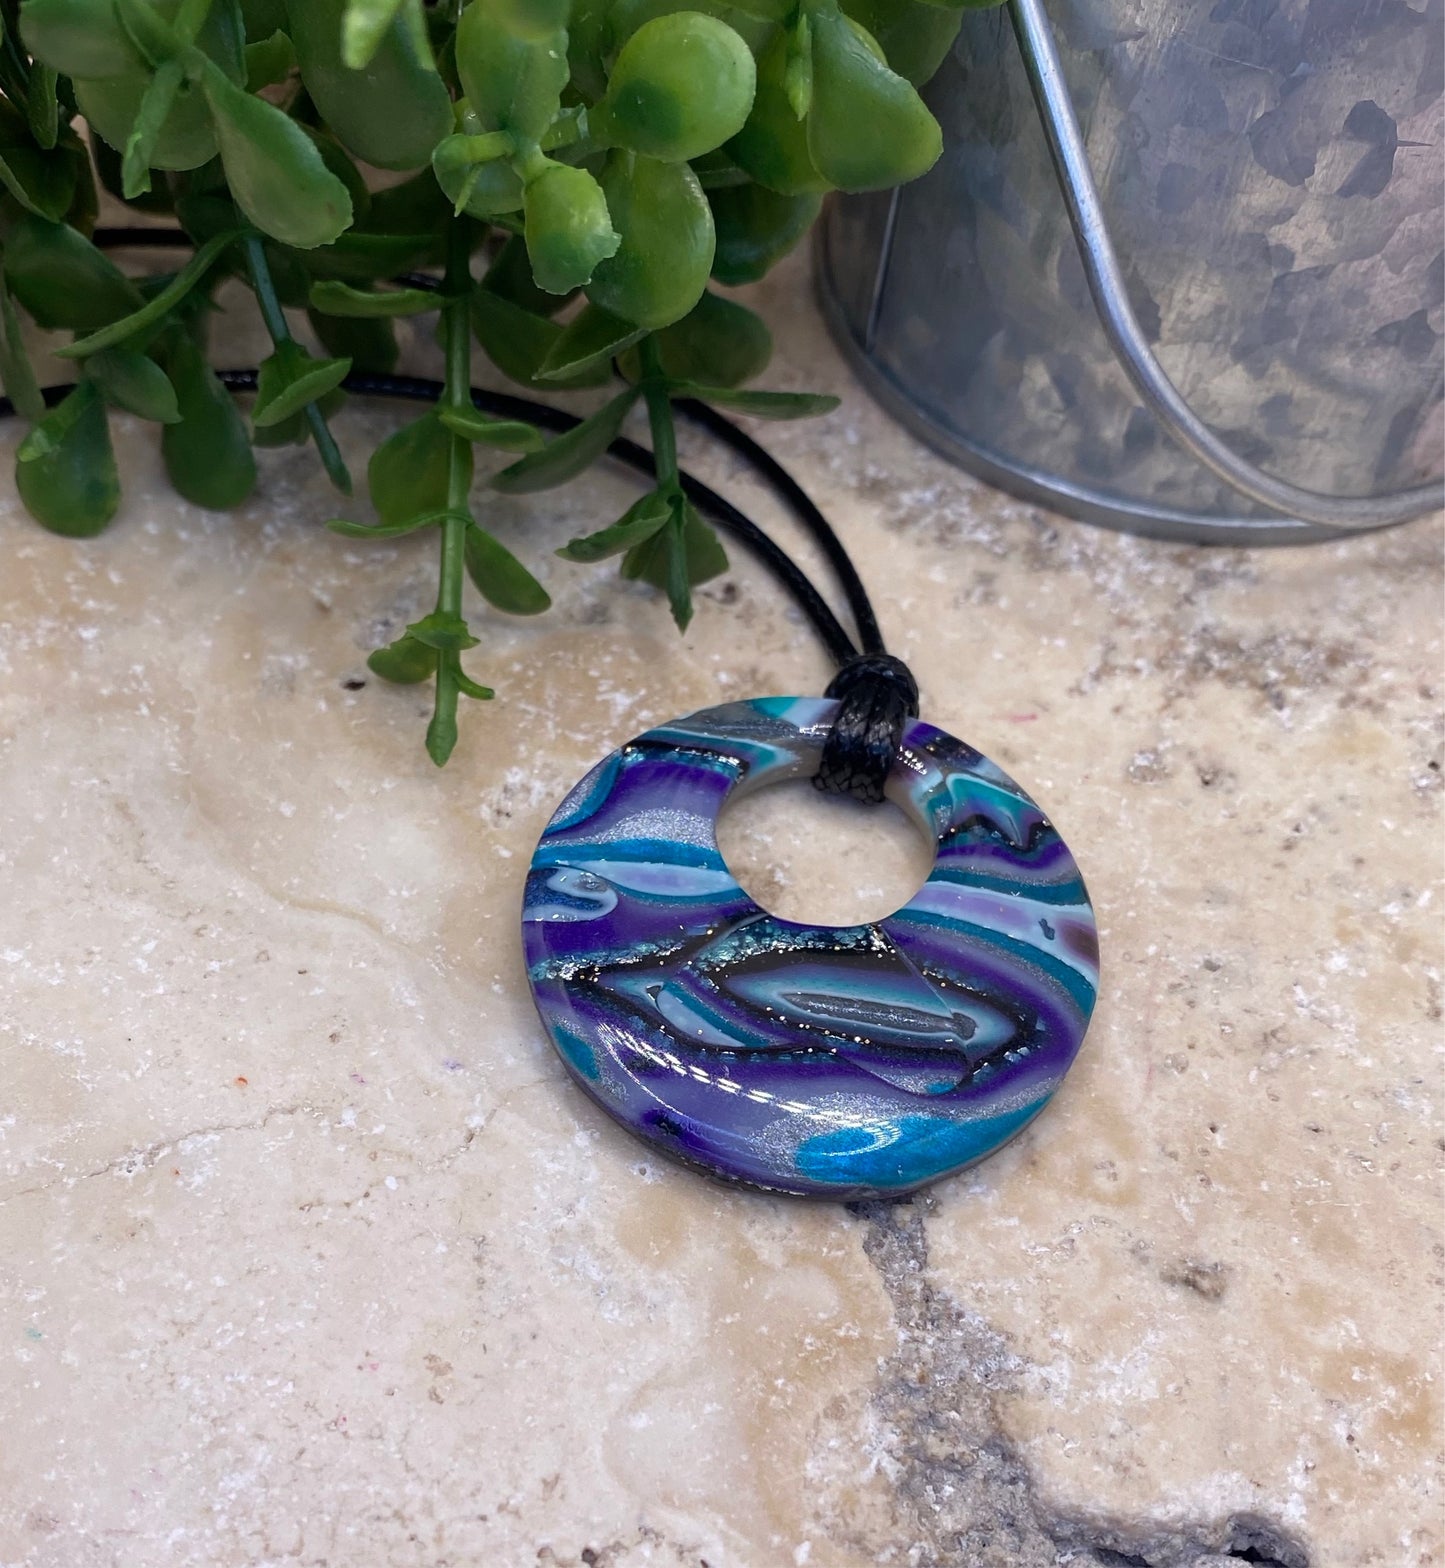 911 polymer clay necklace